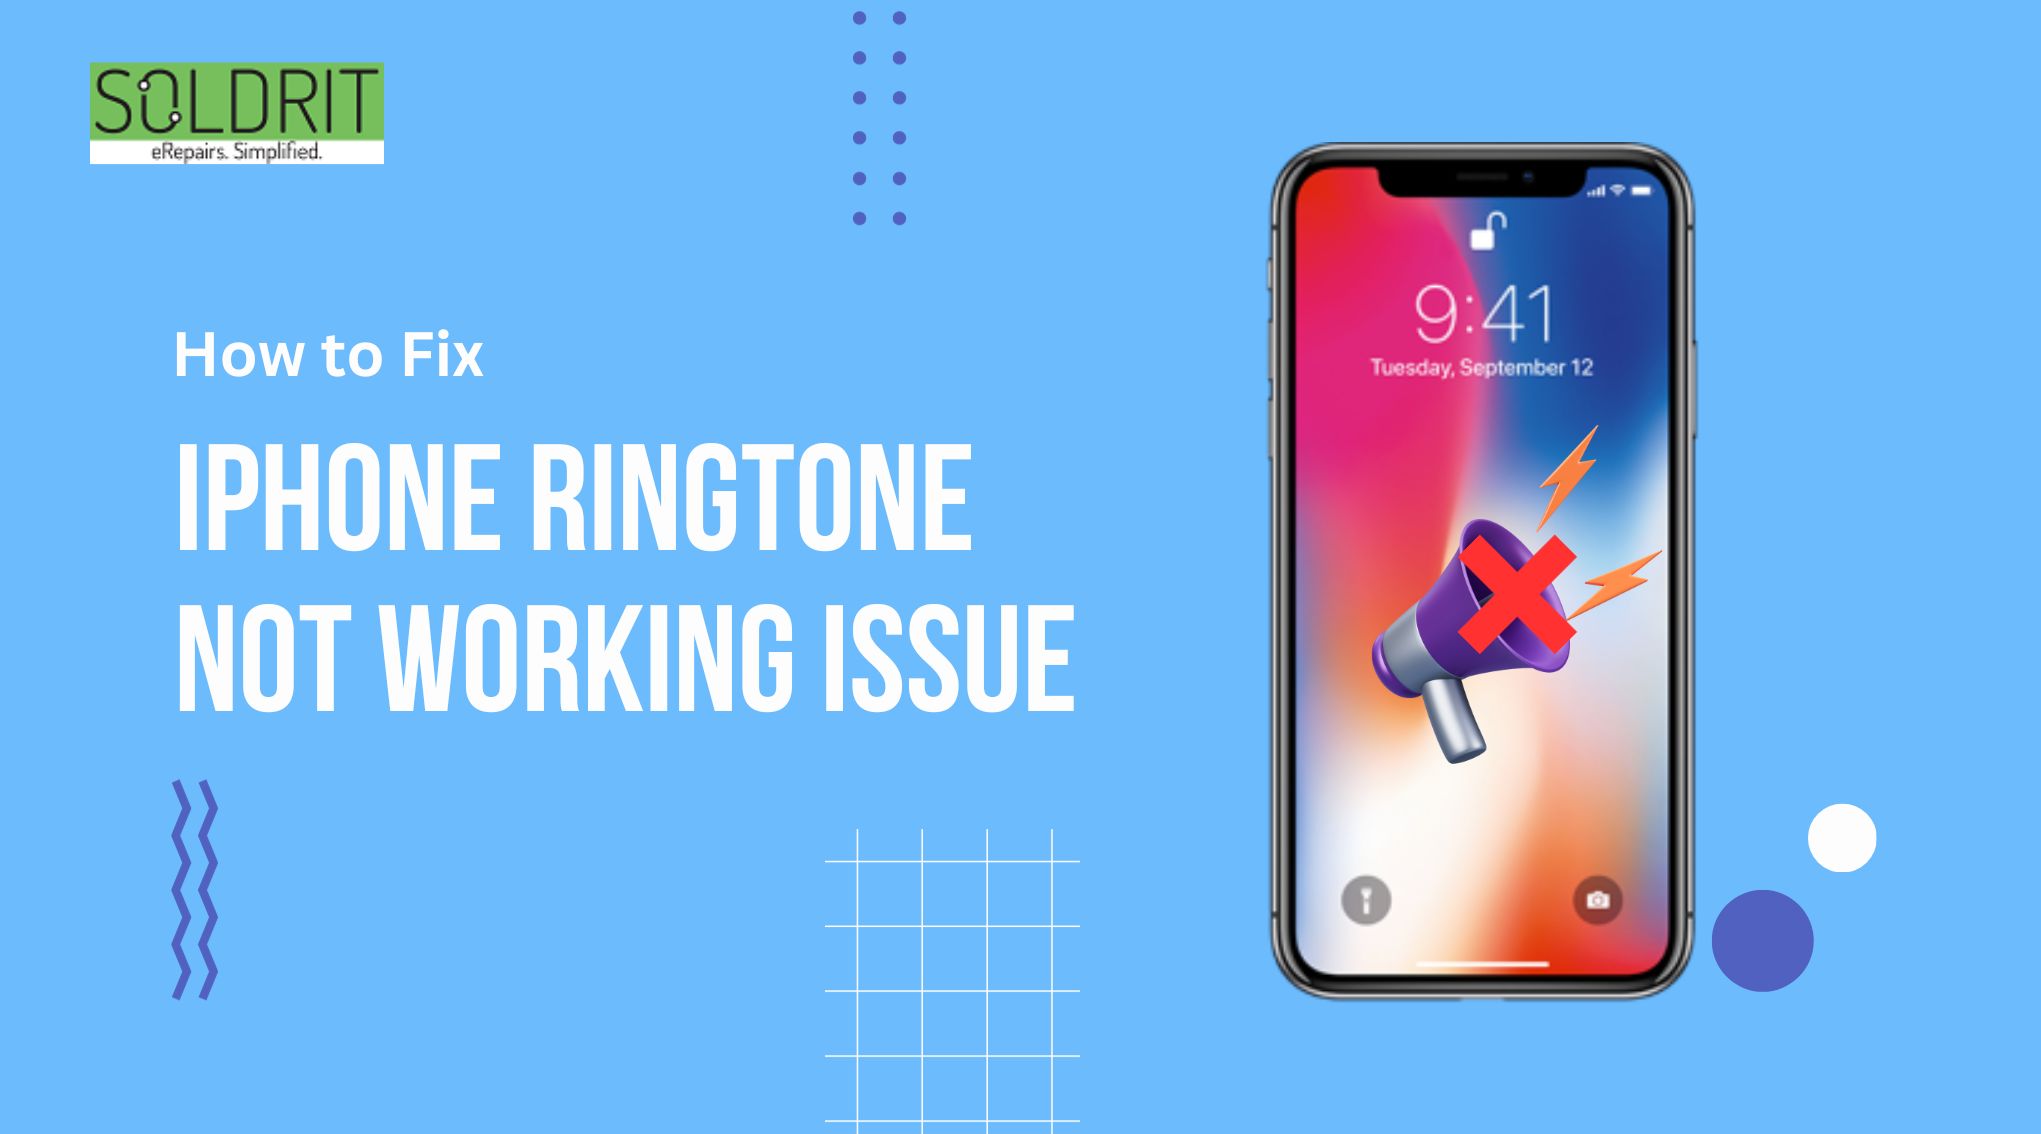 How to Fix iPhone Ringtone Not Working Issue